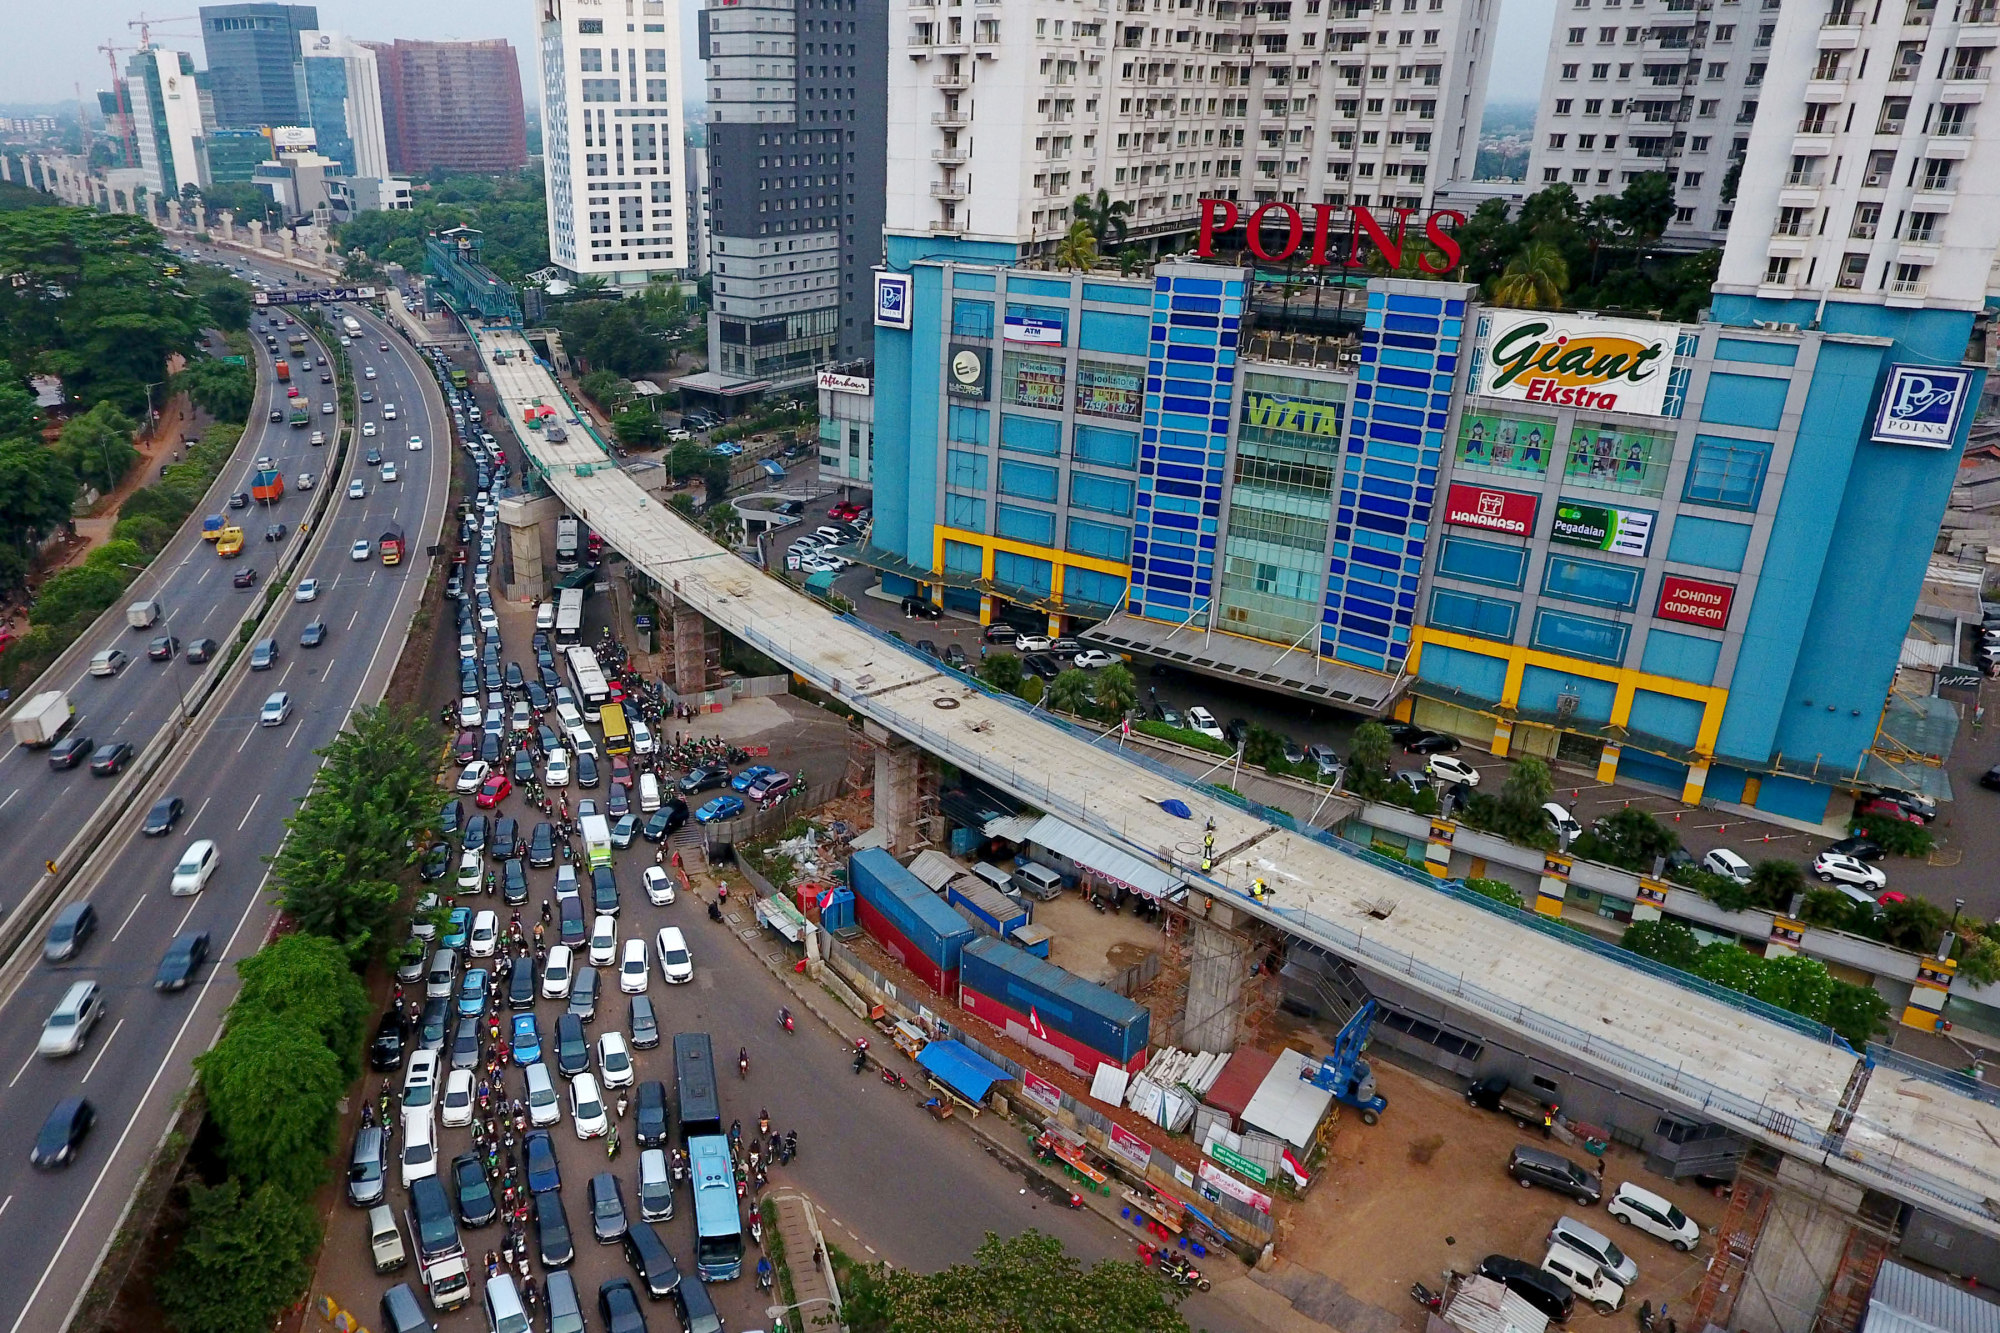 Construction and traffic in Jakarta, Indonesia, on&nbsp;Aug. 13, 2017.&nbsp;